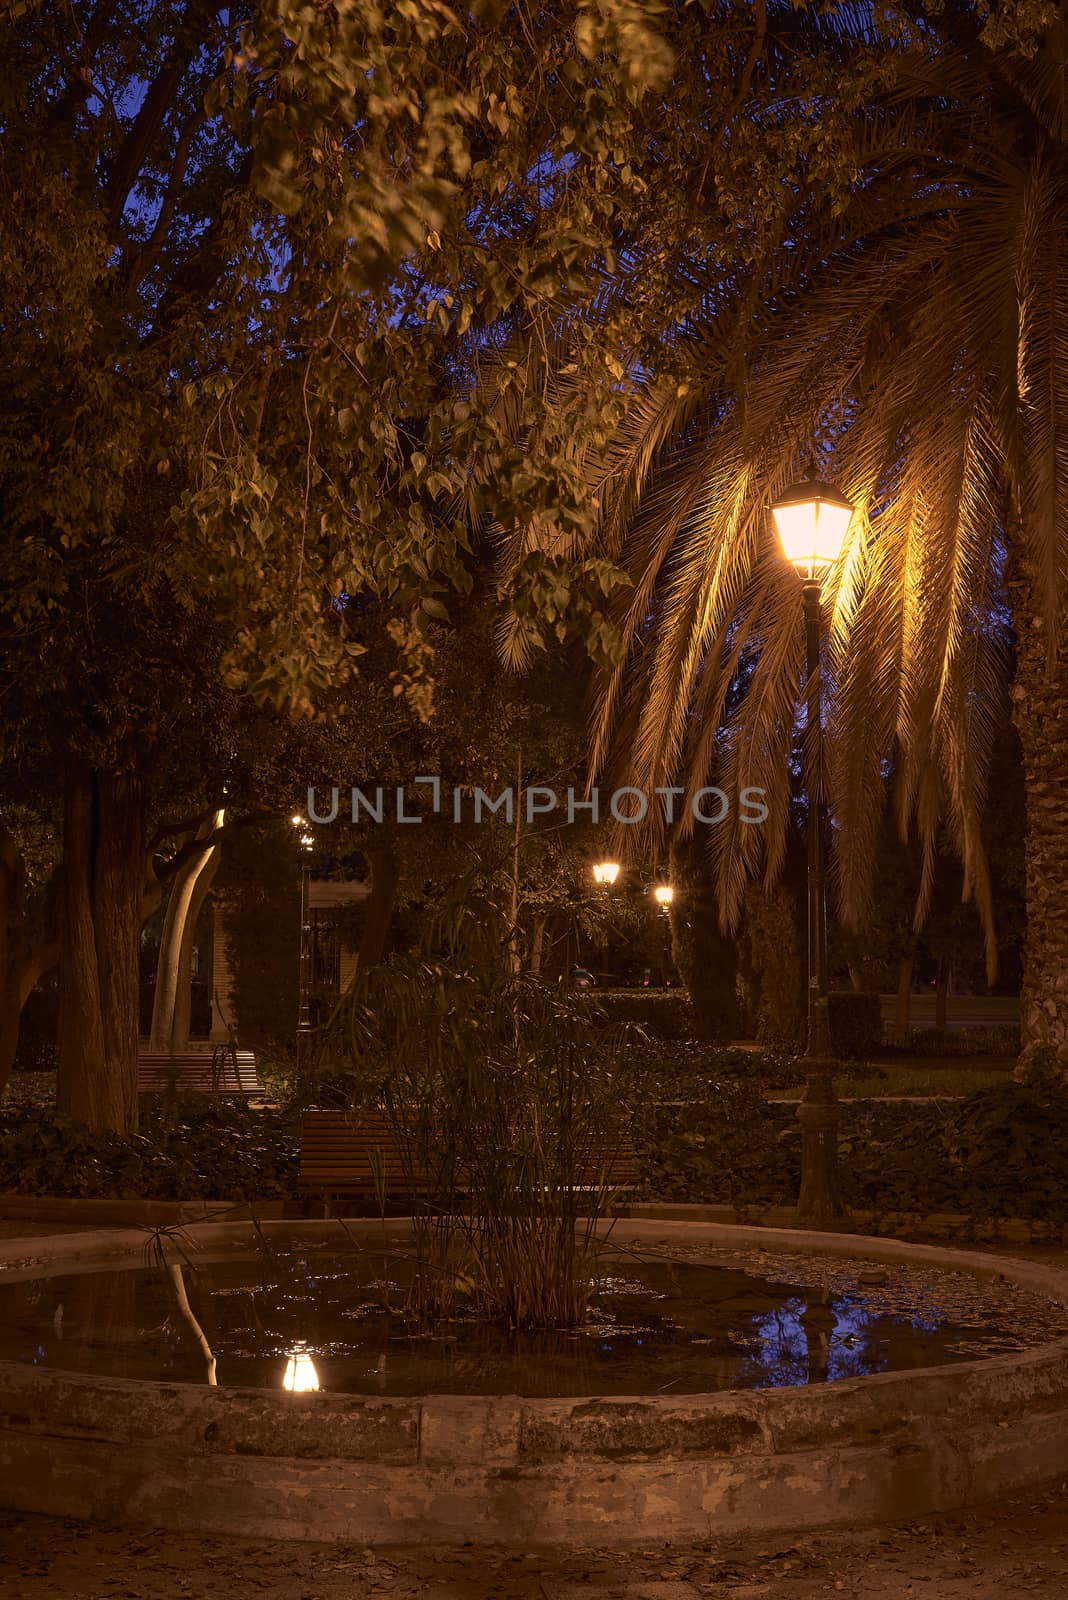 Romantic night park, with fountain and lamppost, reflections, lonely, warm